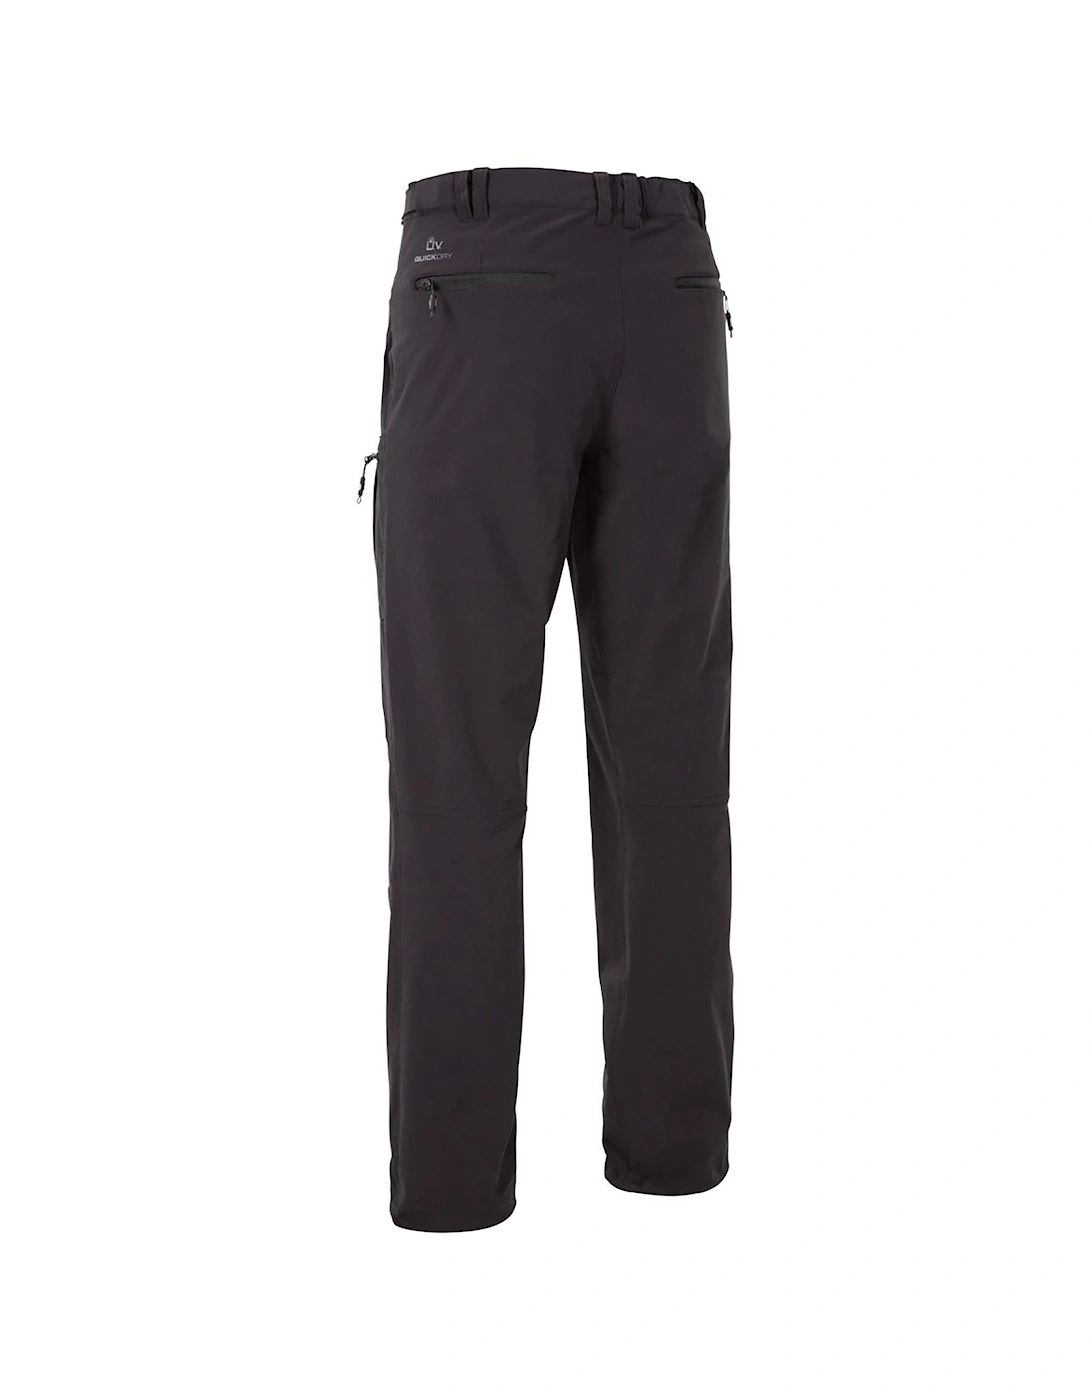 Mens Tuned Adventure Trousers